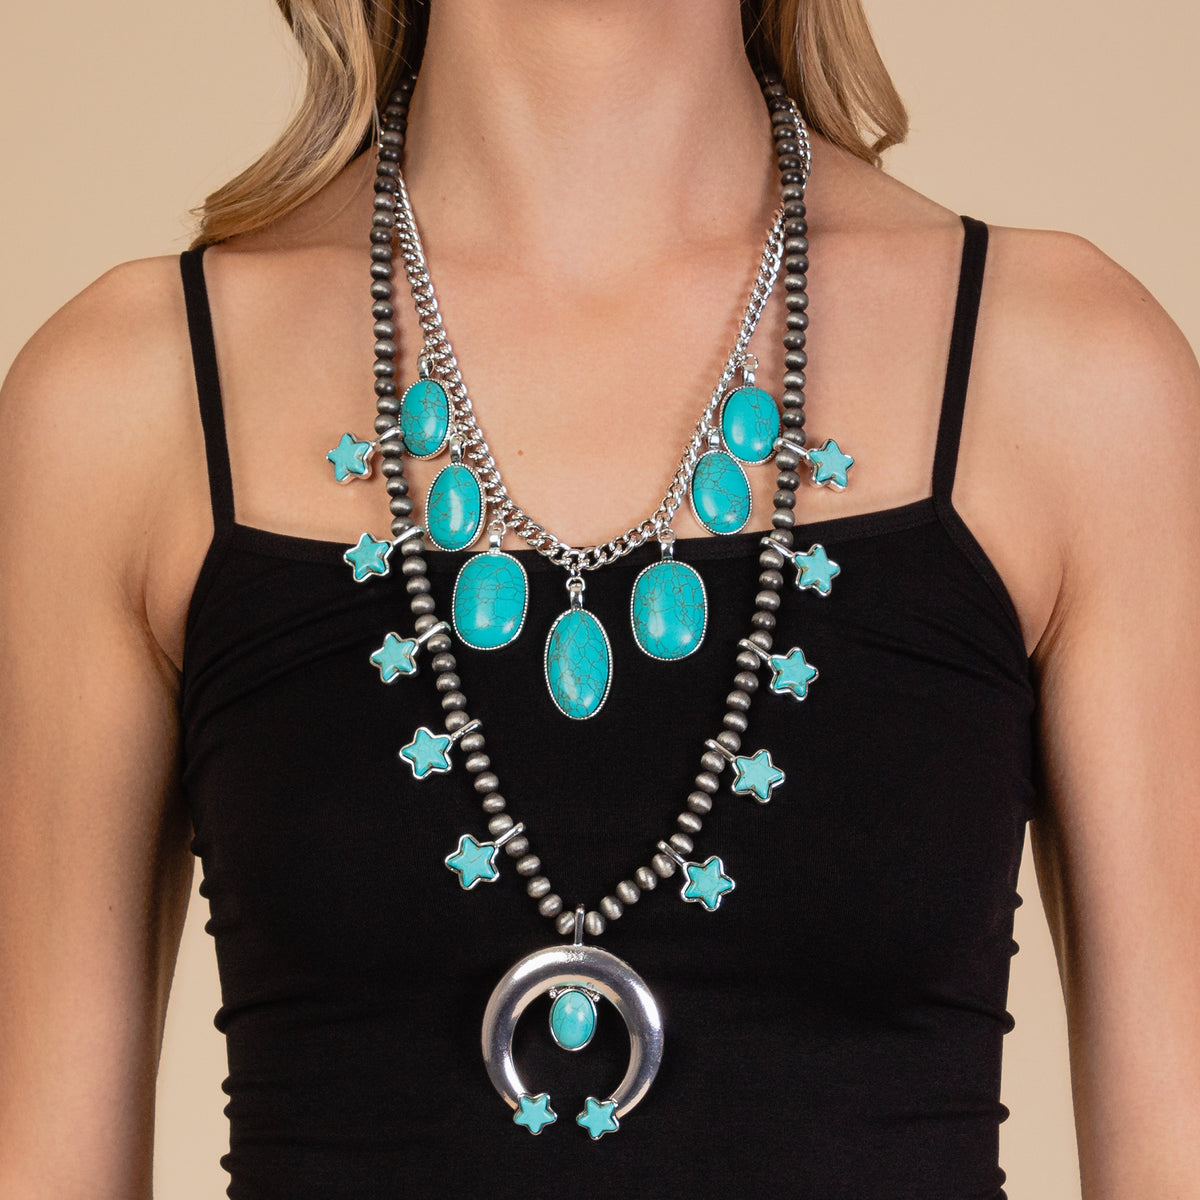 72916 - Star Squash Blossom Necklace - Turquoise & Silver